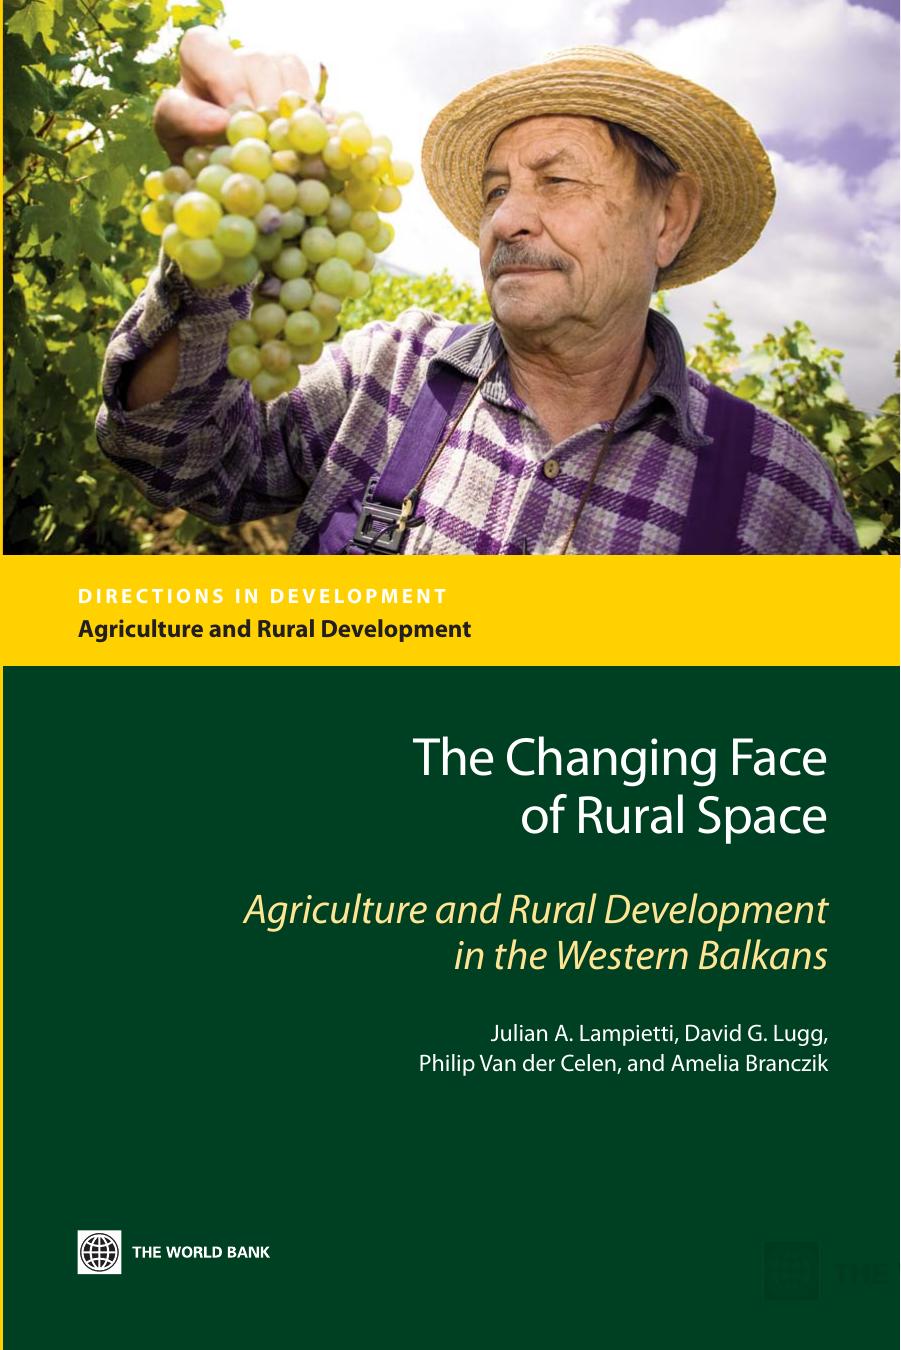 The Changing Face of Rural Space 2009